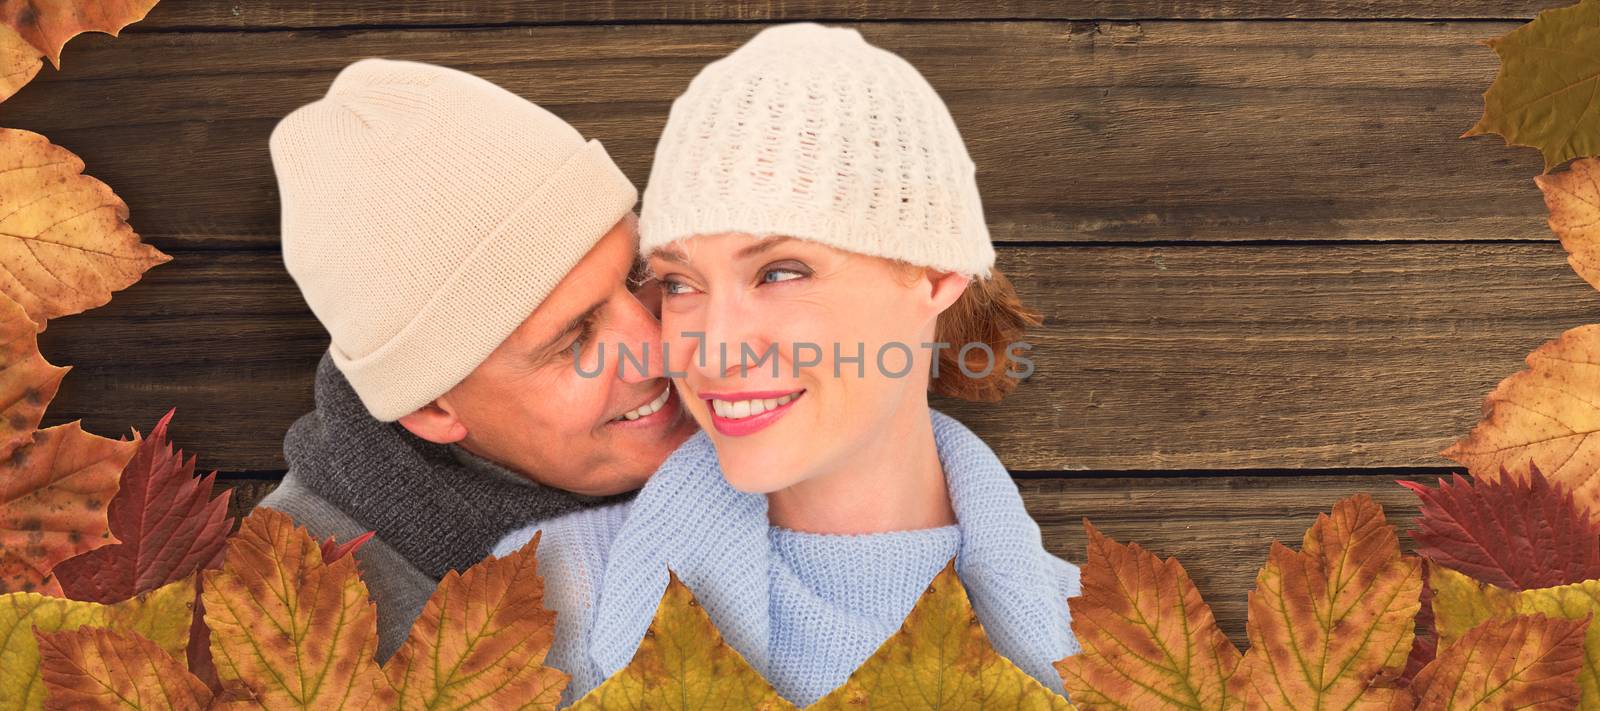 Composite image of casual couple in warm clothing by Wavebreakmedia